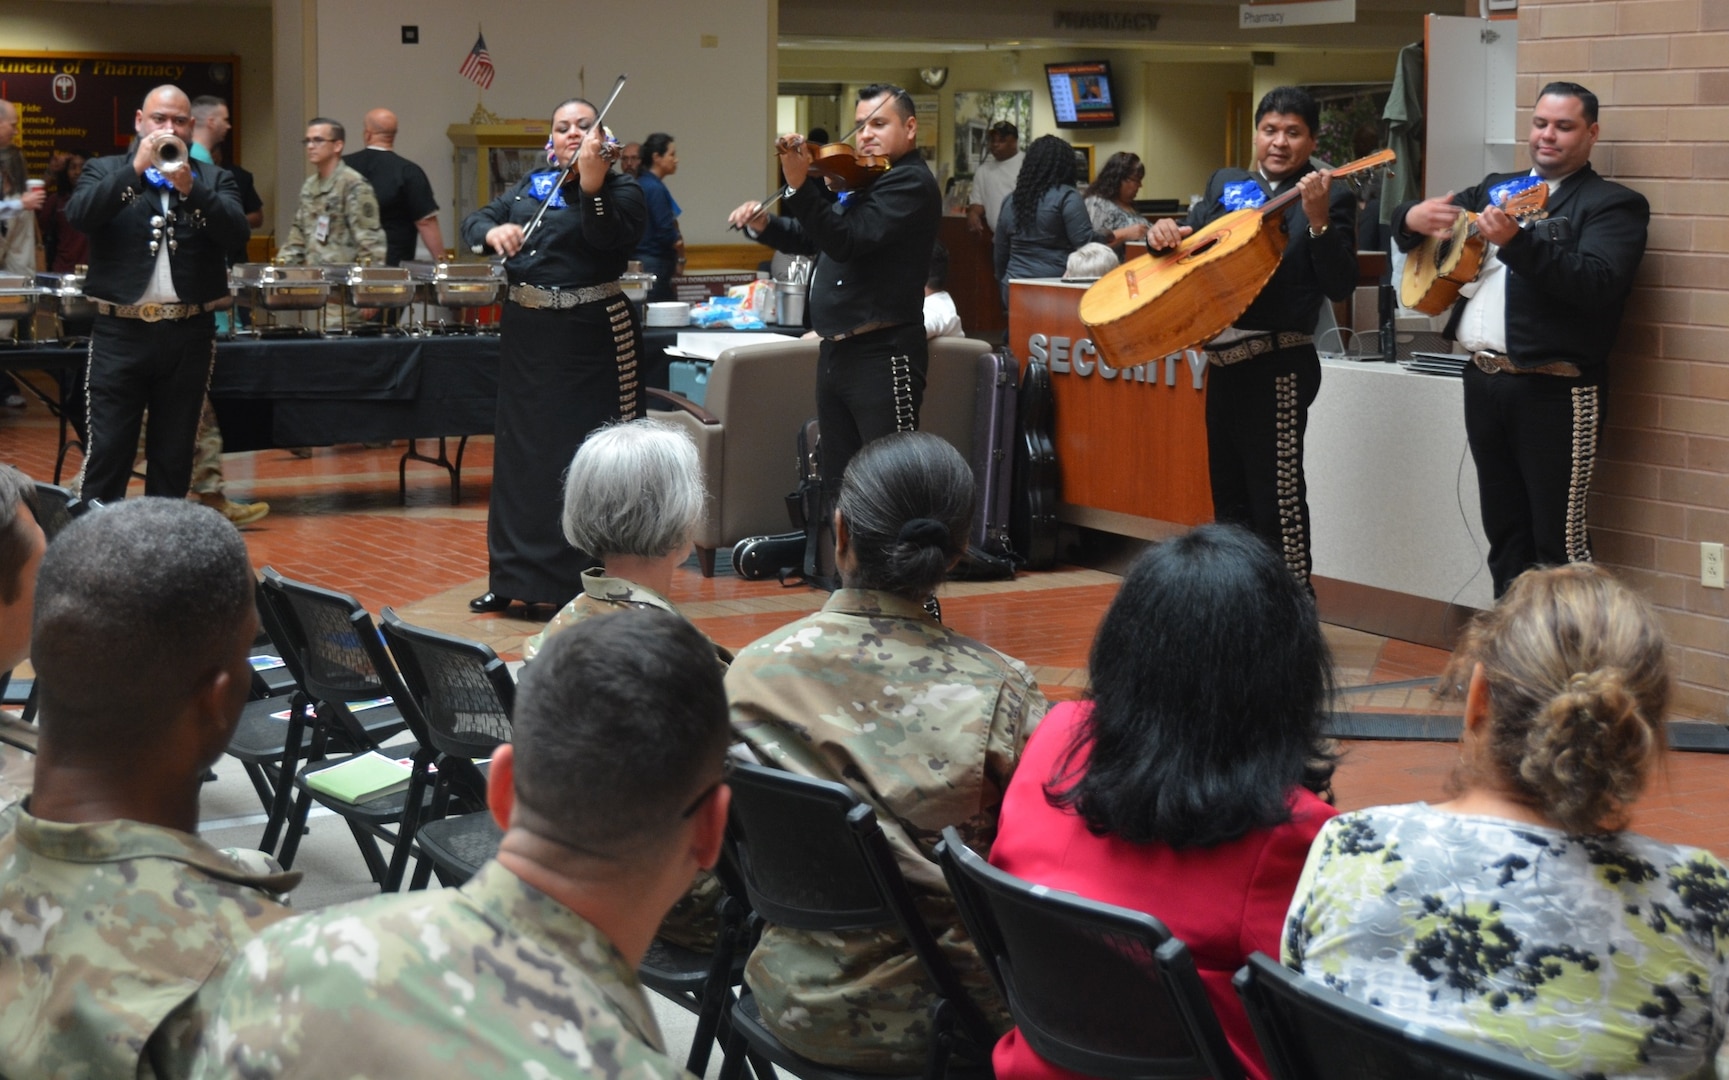 Mariachi Mexico De Noche entertains the crowd Oct. 5 at the Hispanic Heritage observance in the Brooke Army Medical Center Medical Mall.